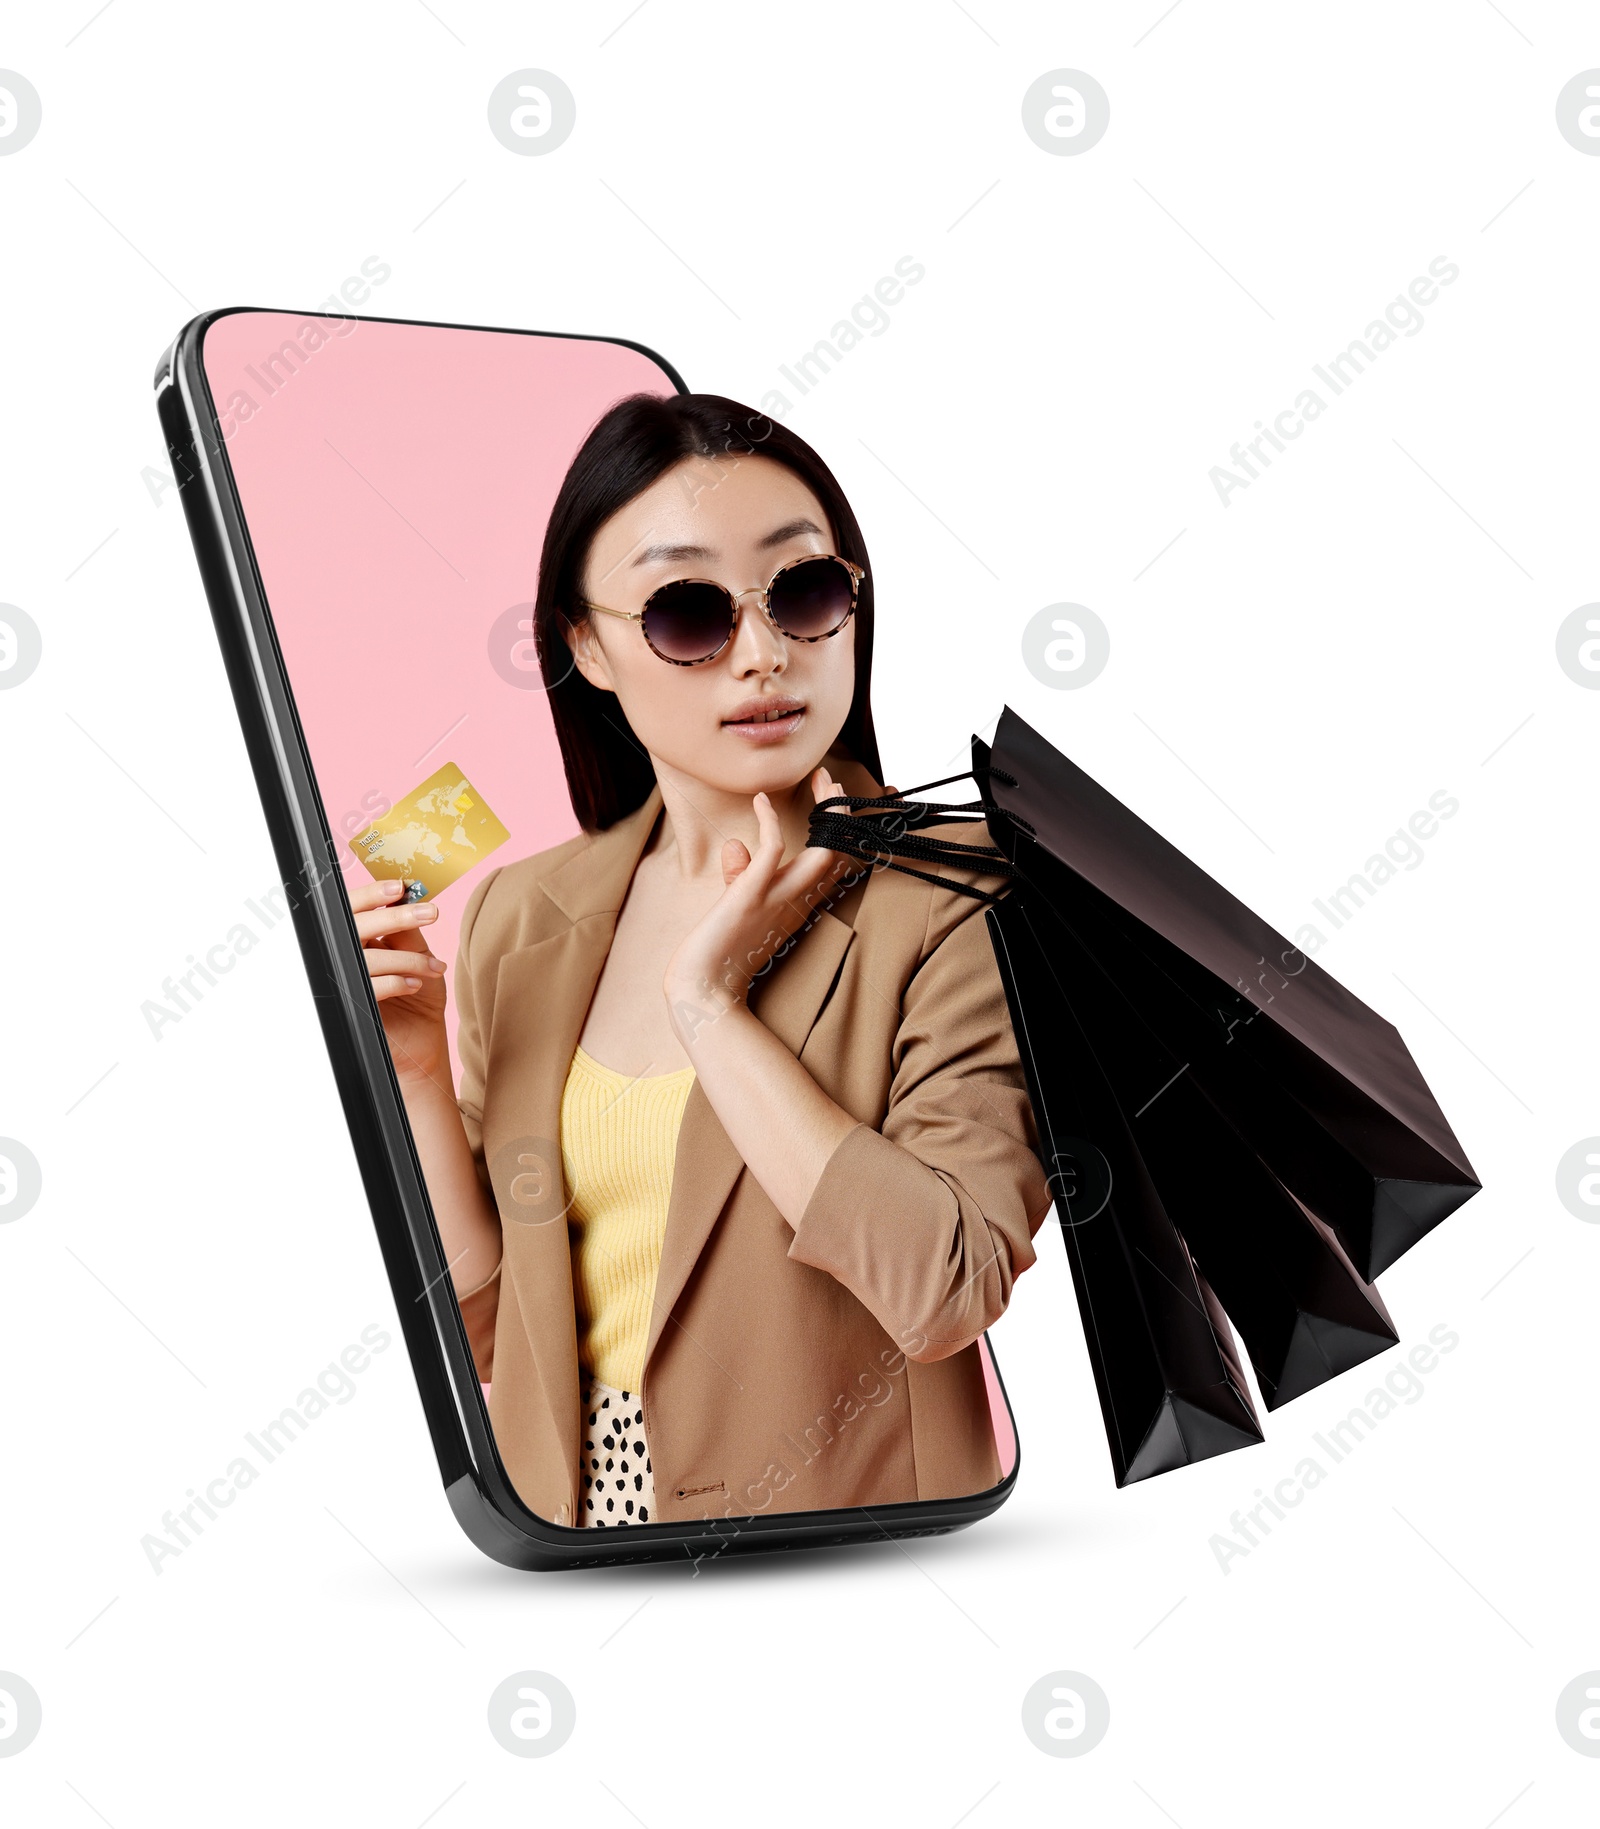 Image of Online shopping. Woman with paper bags and credit card looking out from smartphone on white background